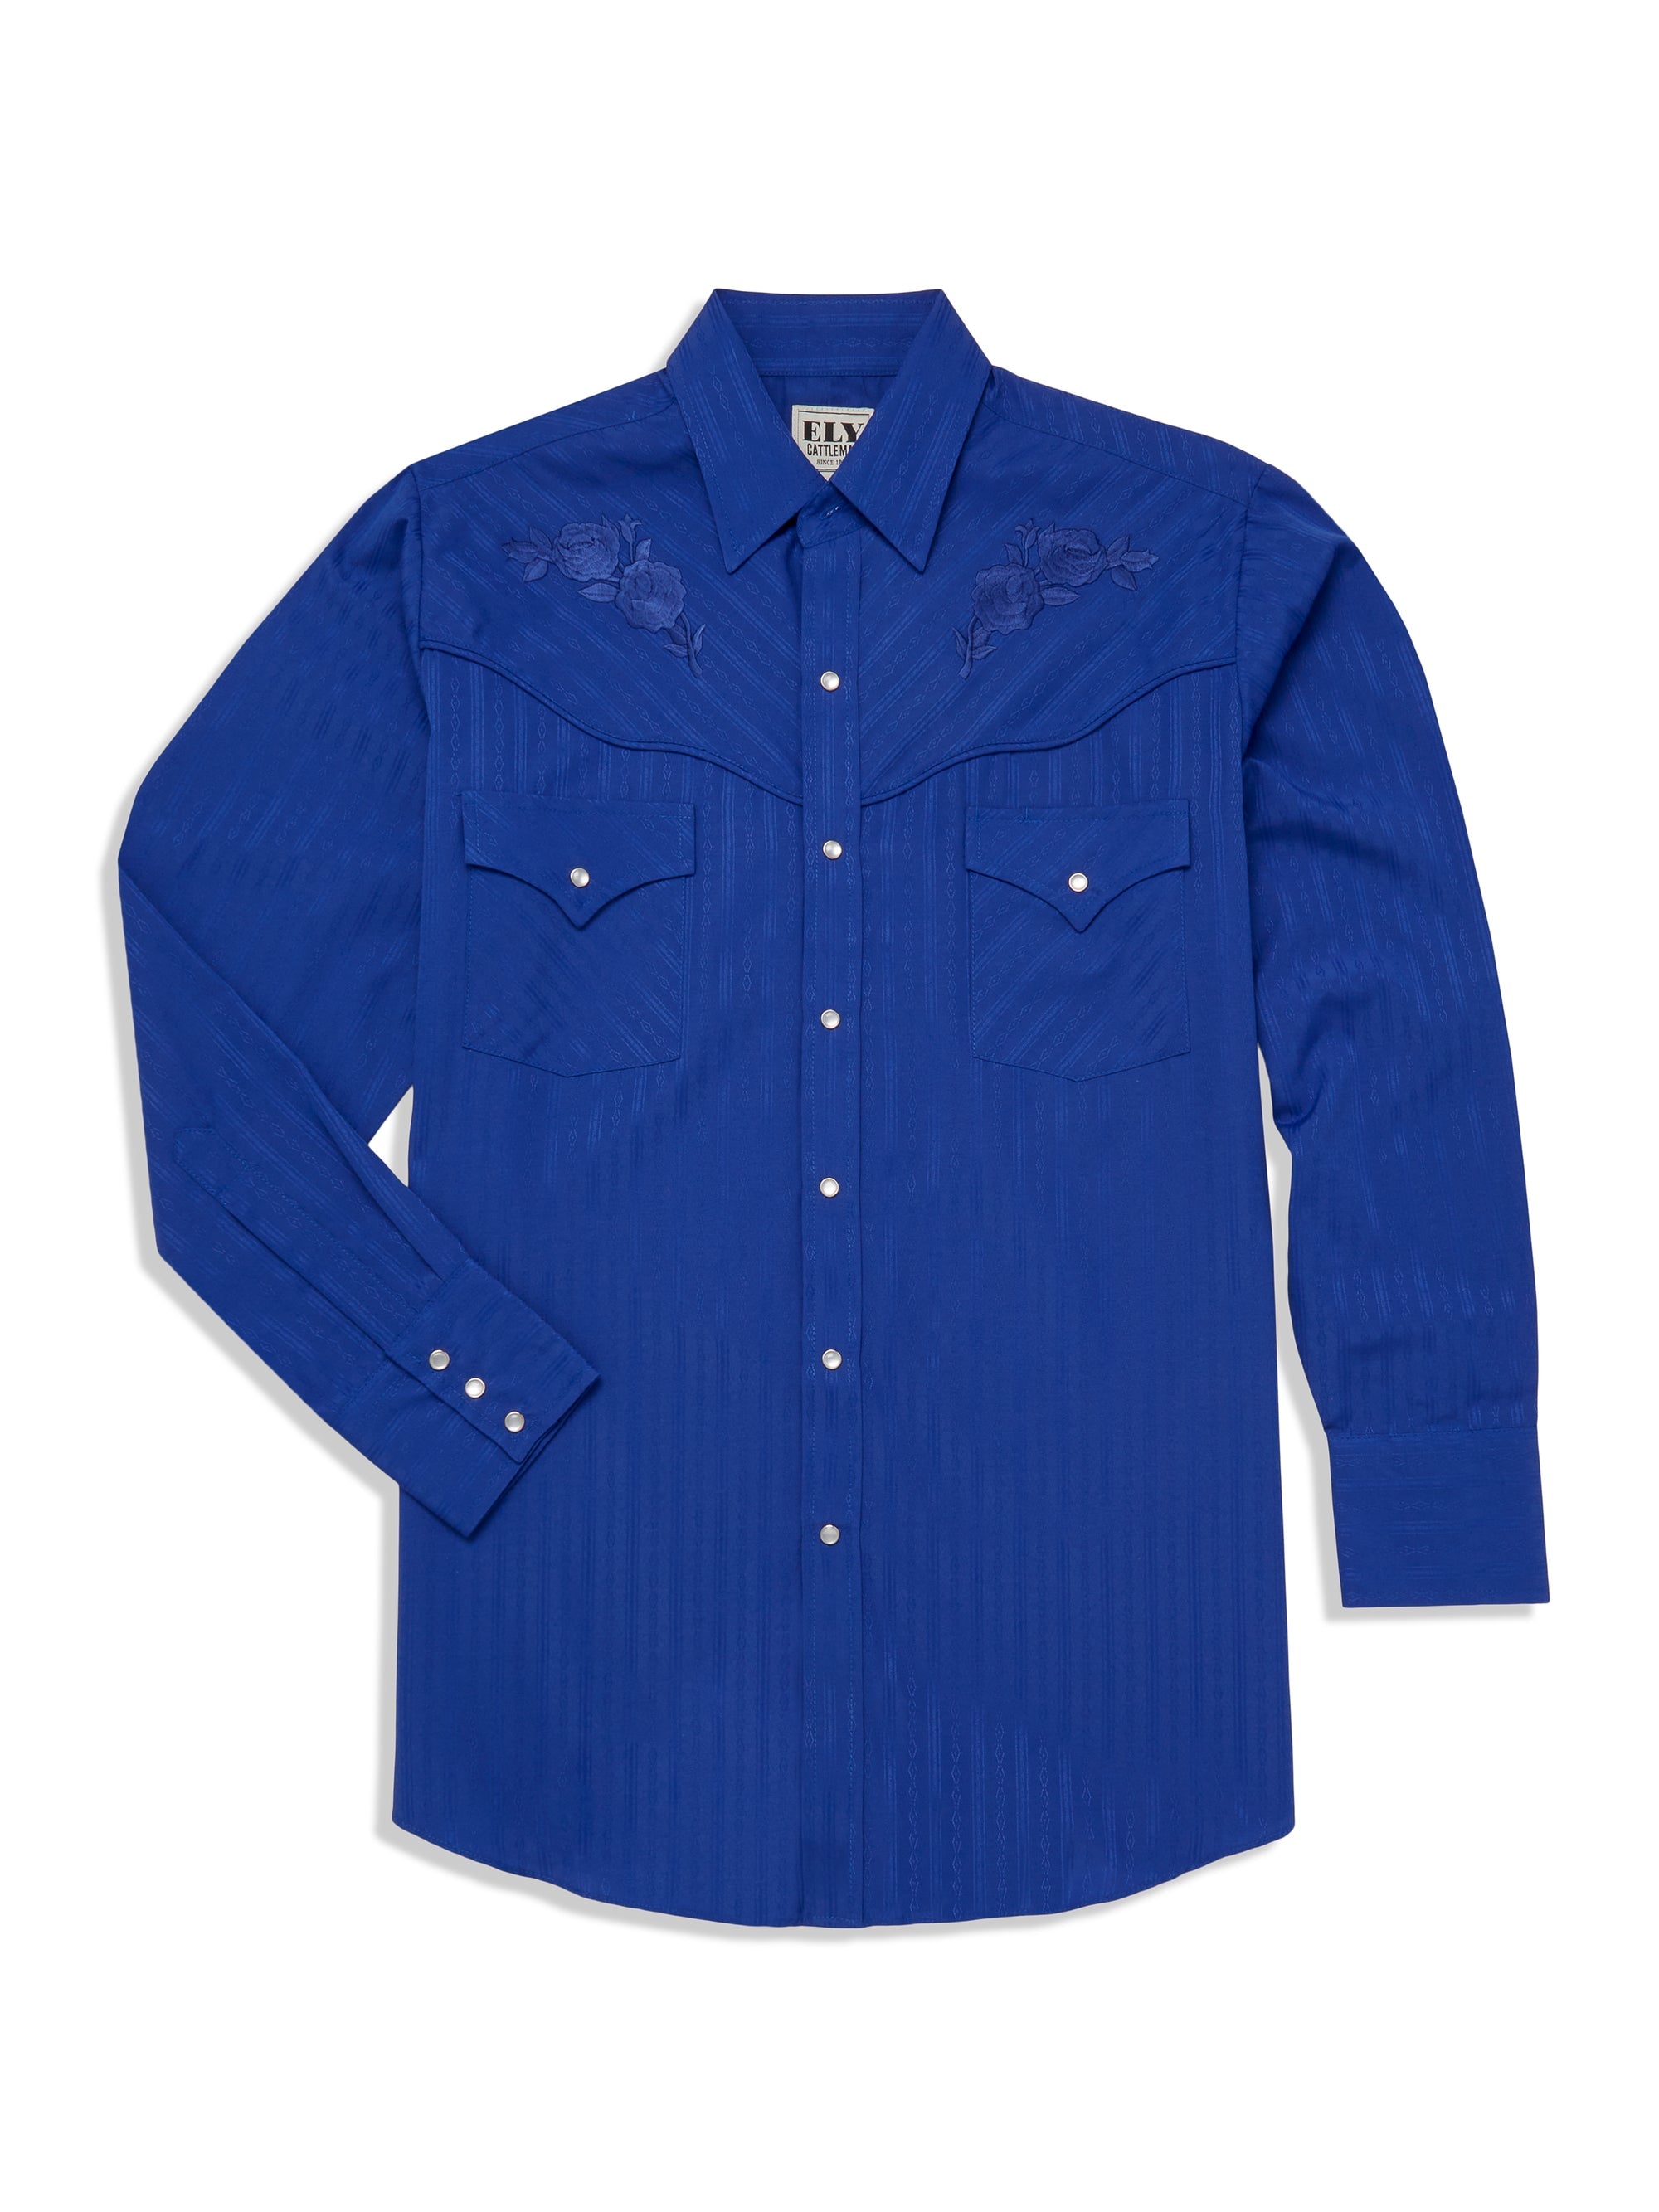 Men's Royal Blue Western Shirt w/ Embroidery